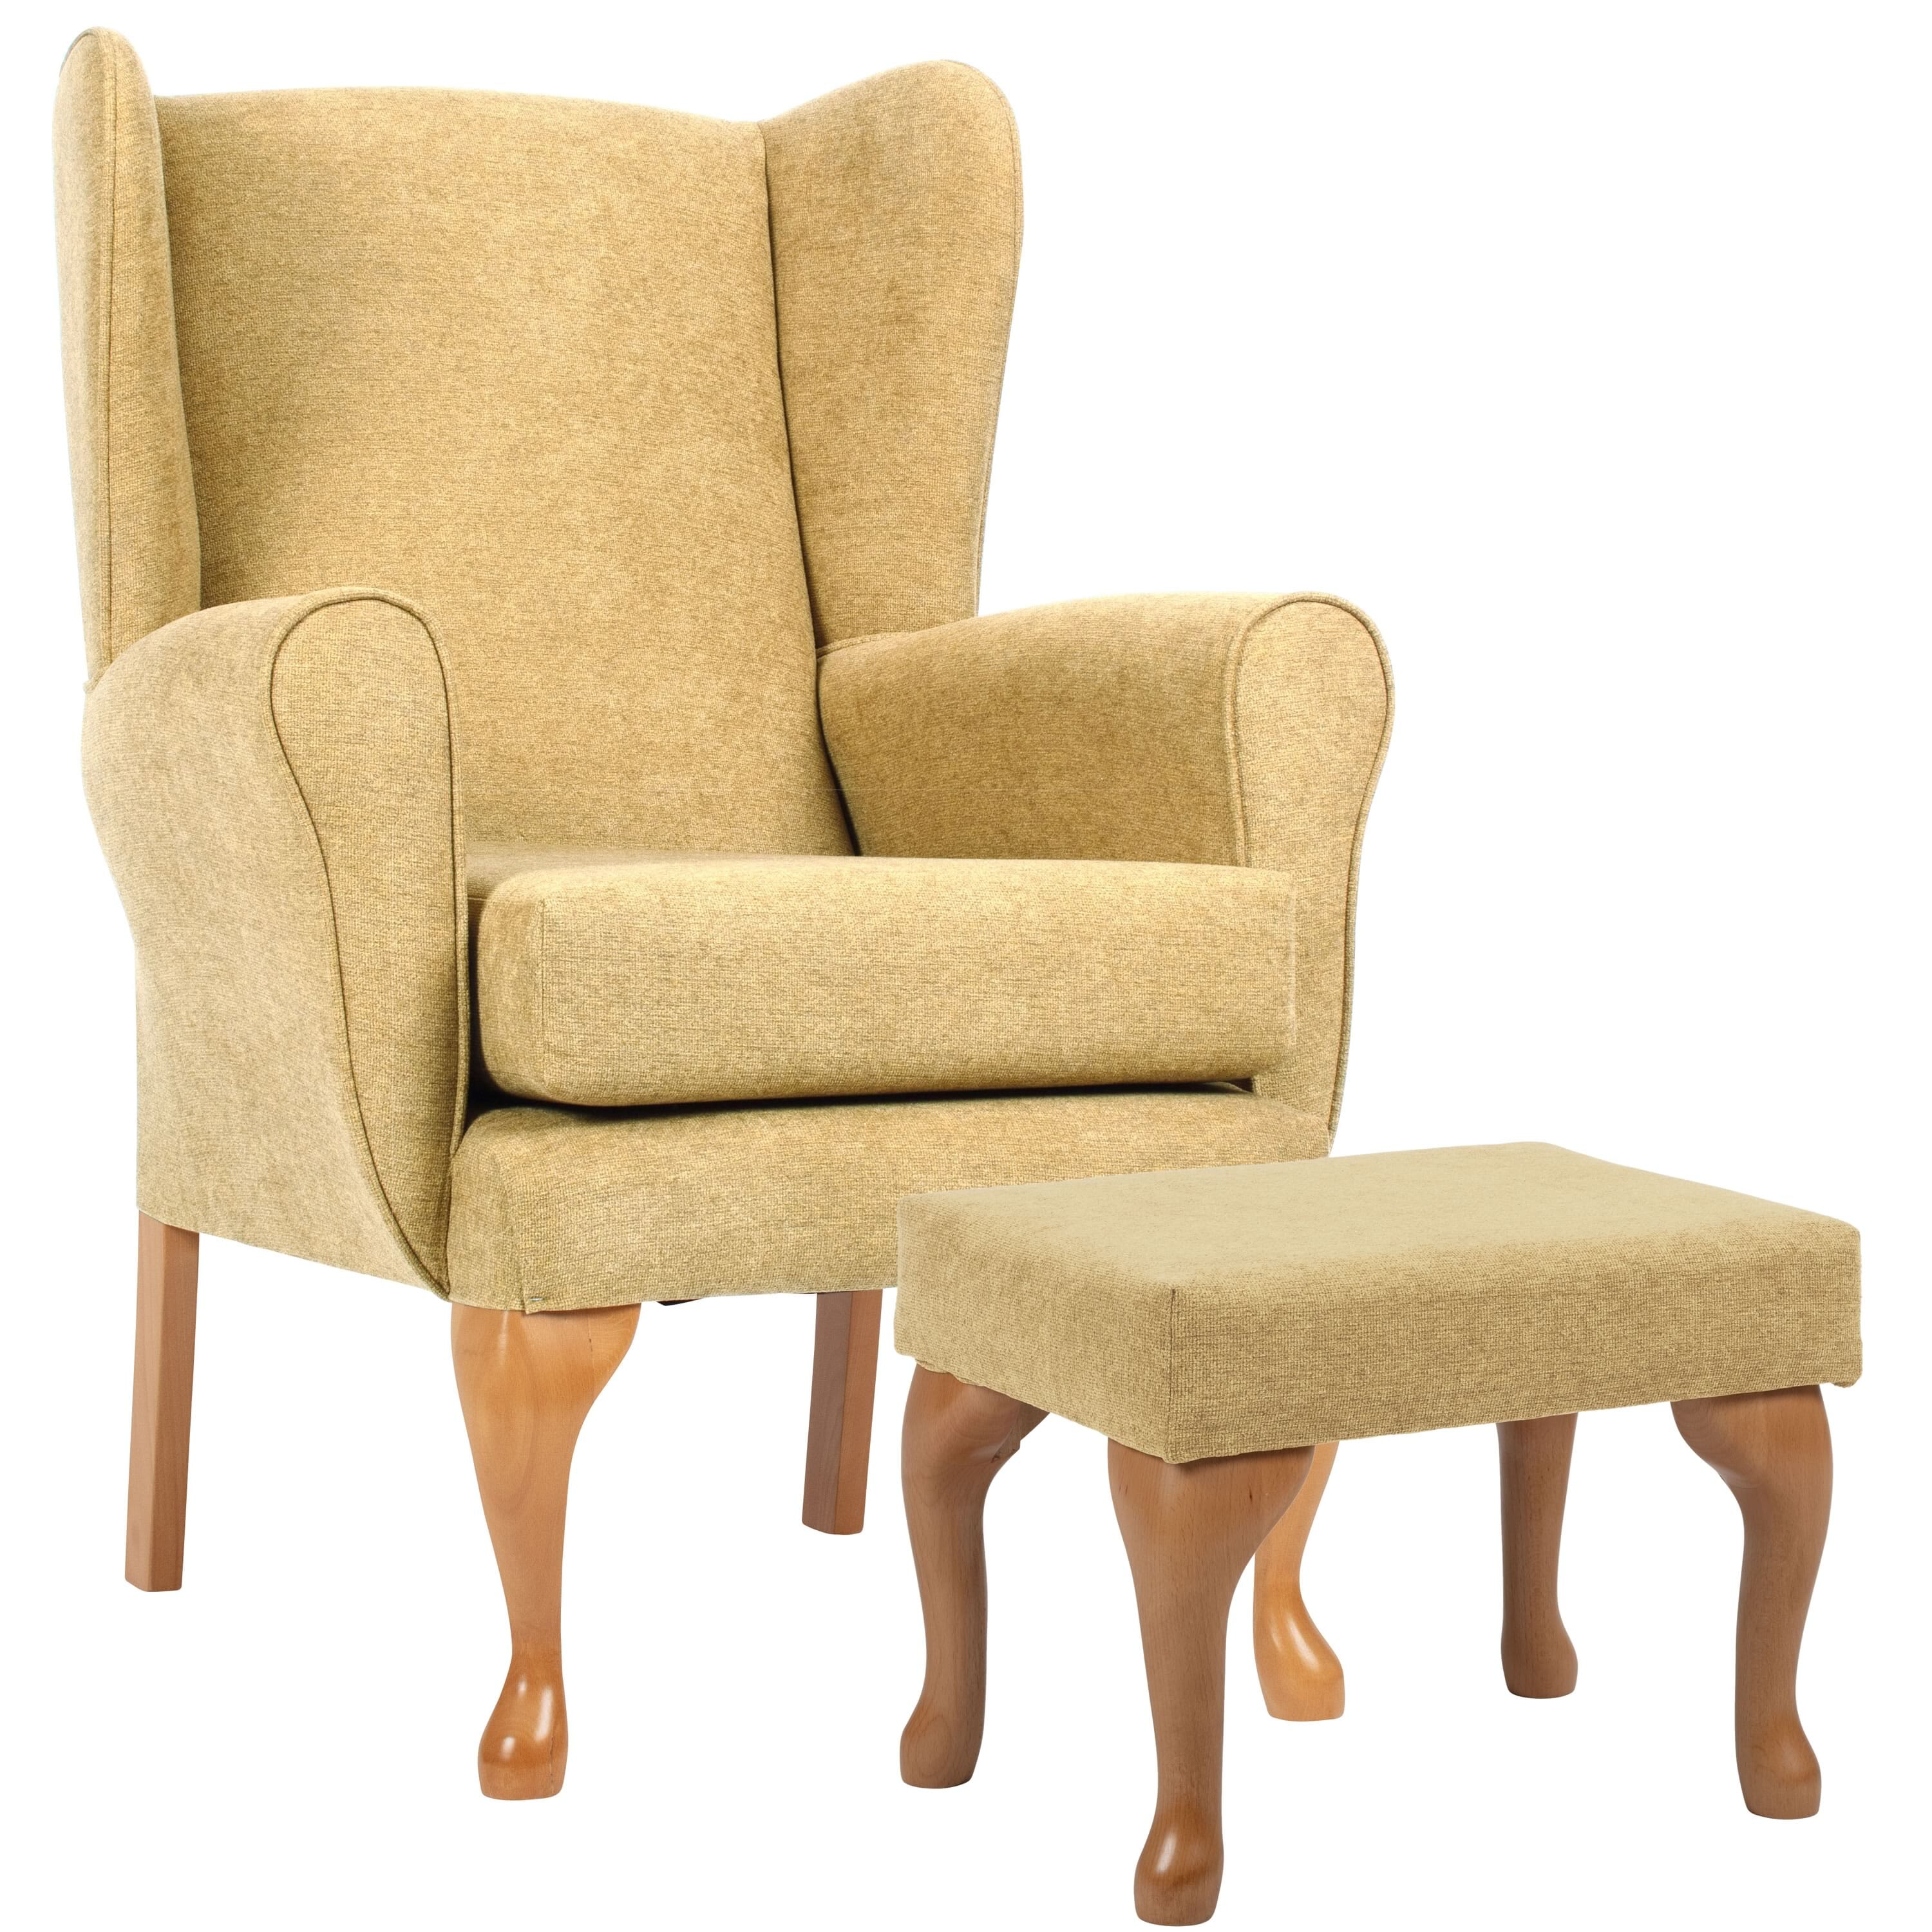 View Queen Anne Fireside Chair with Matching Footstool Pale Gold information